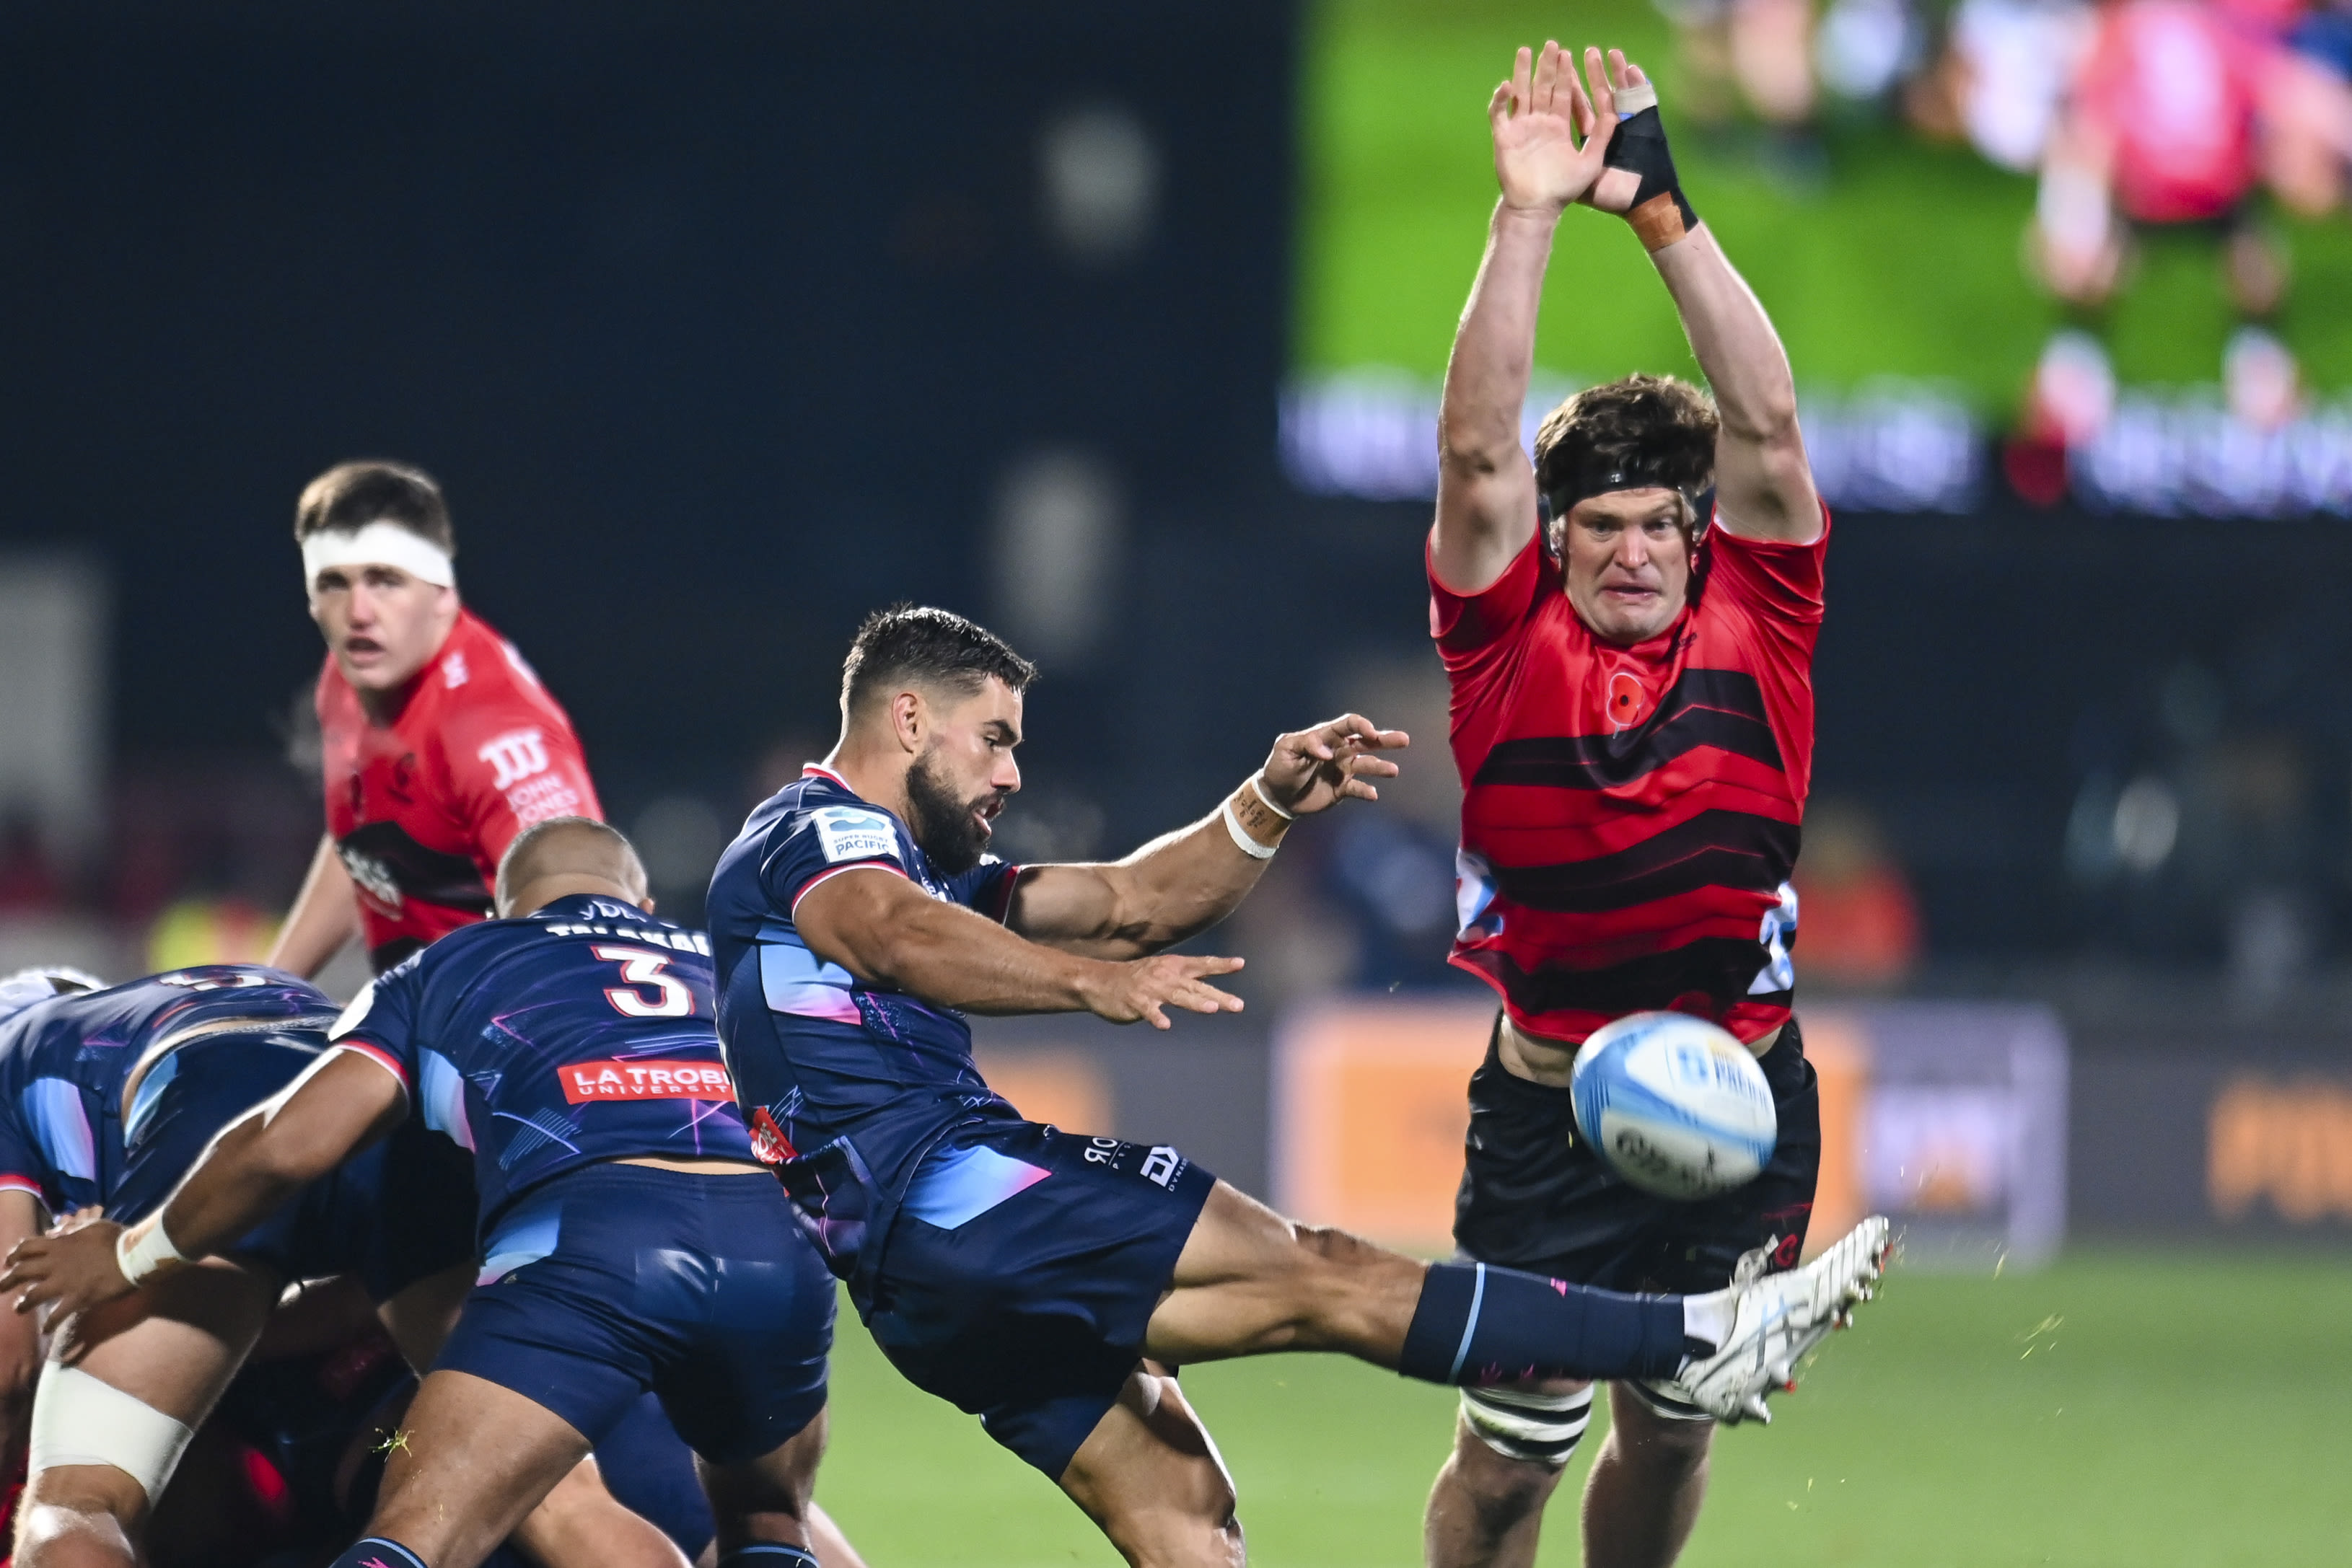 Blues rise, Crusaders fall marks Super Rugby power shift in New Zealand